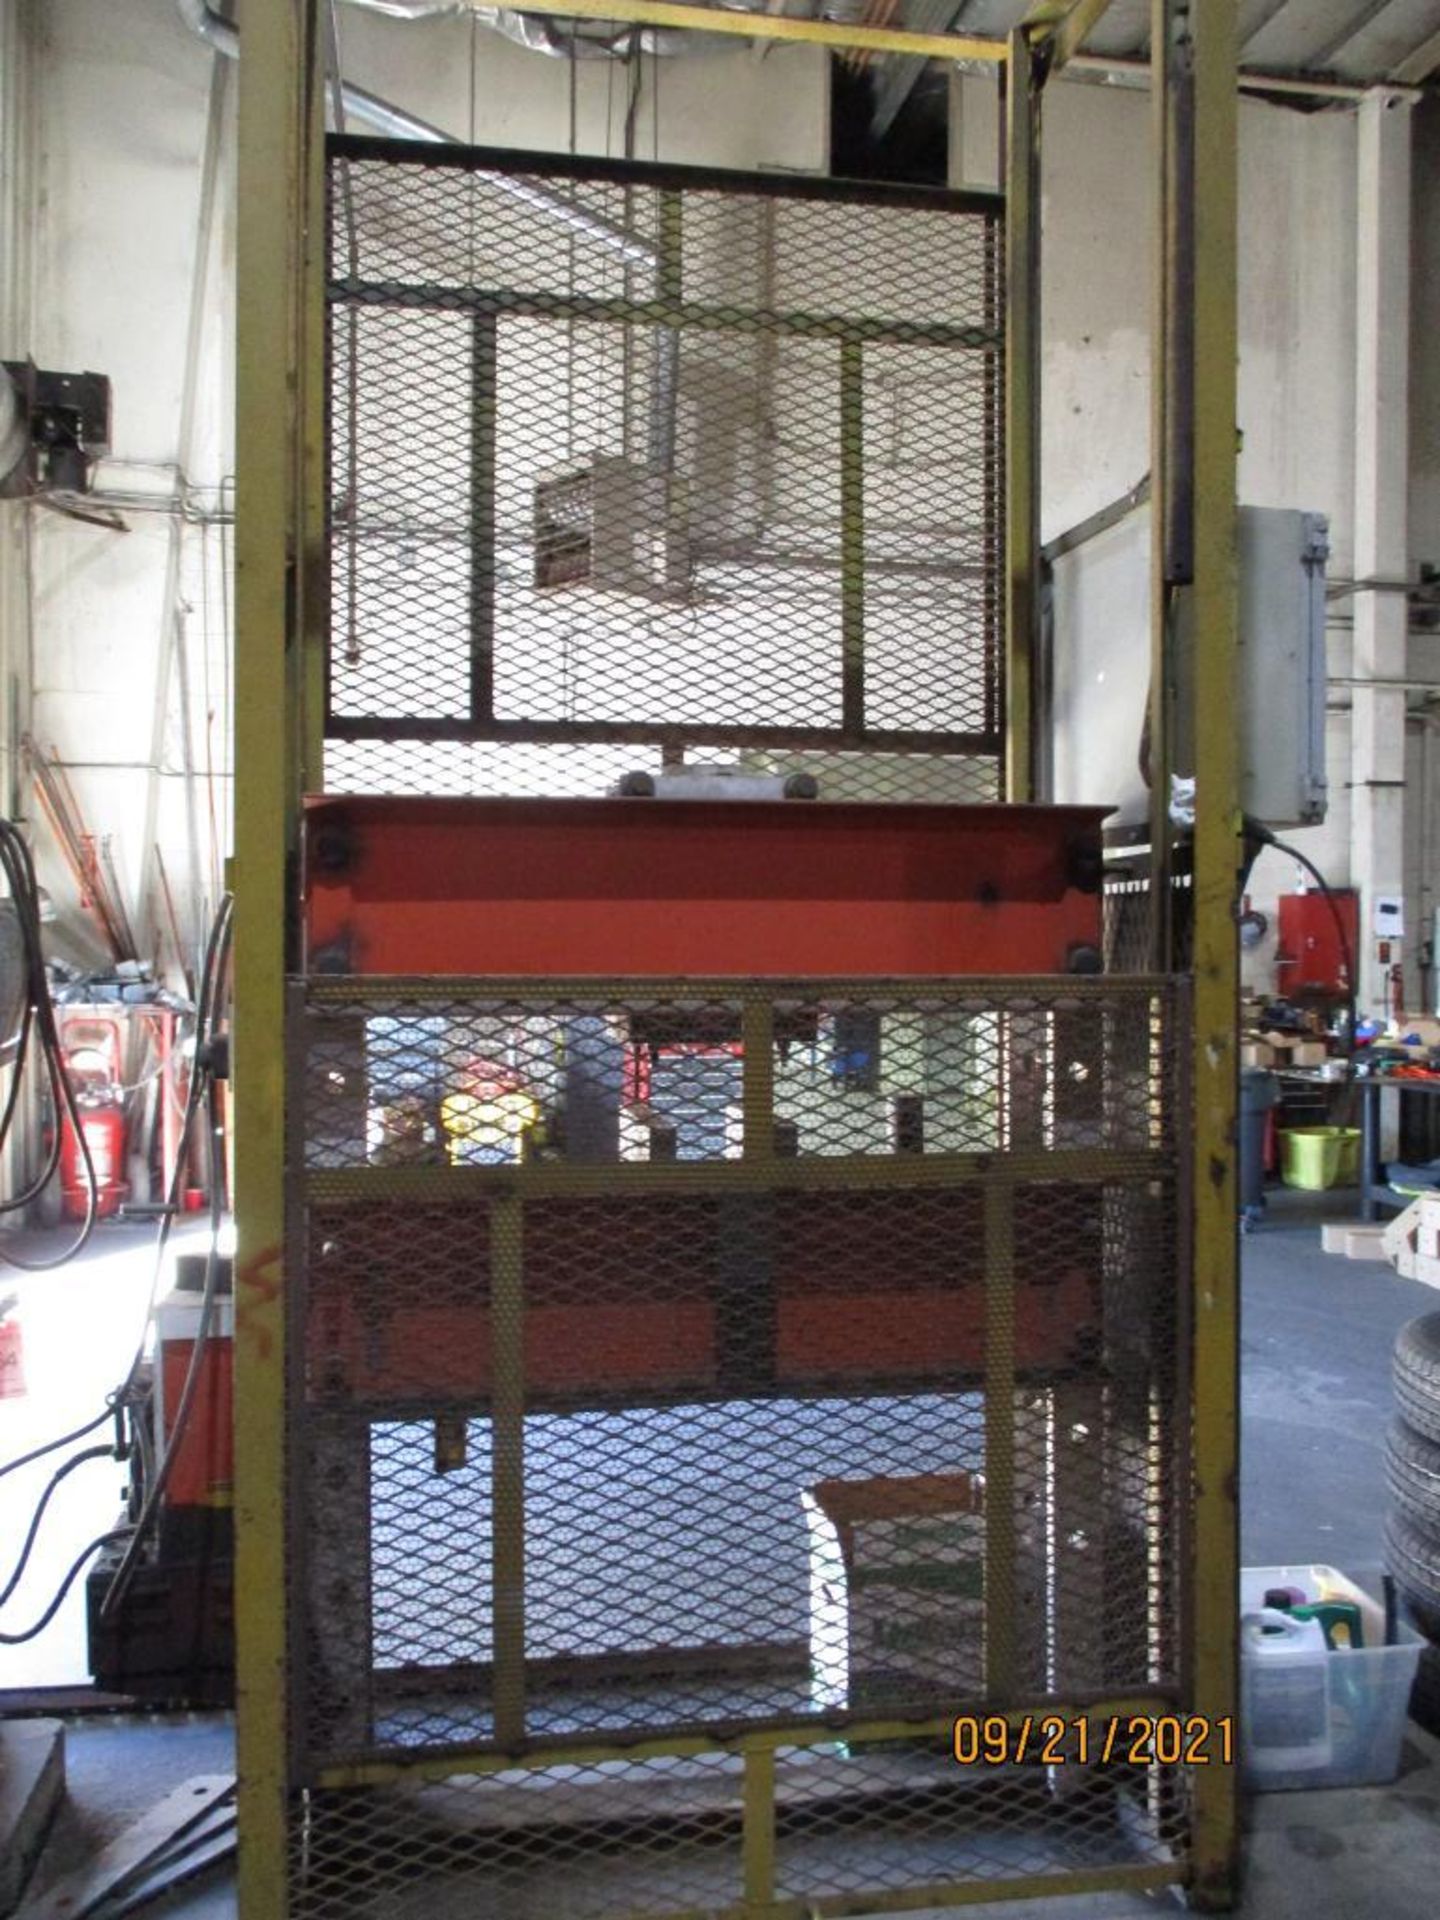 OTC 100 Ton H-Frame Adjustable Hydraulic Press S/N 1108P00086, 65" x 35" x 12', Safety Cage - Image 2 of 6